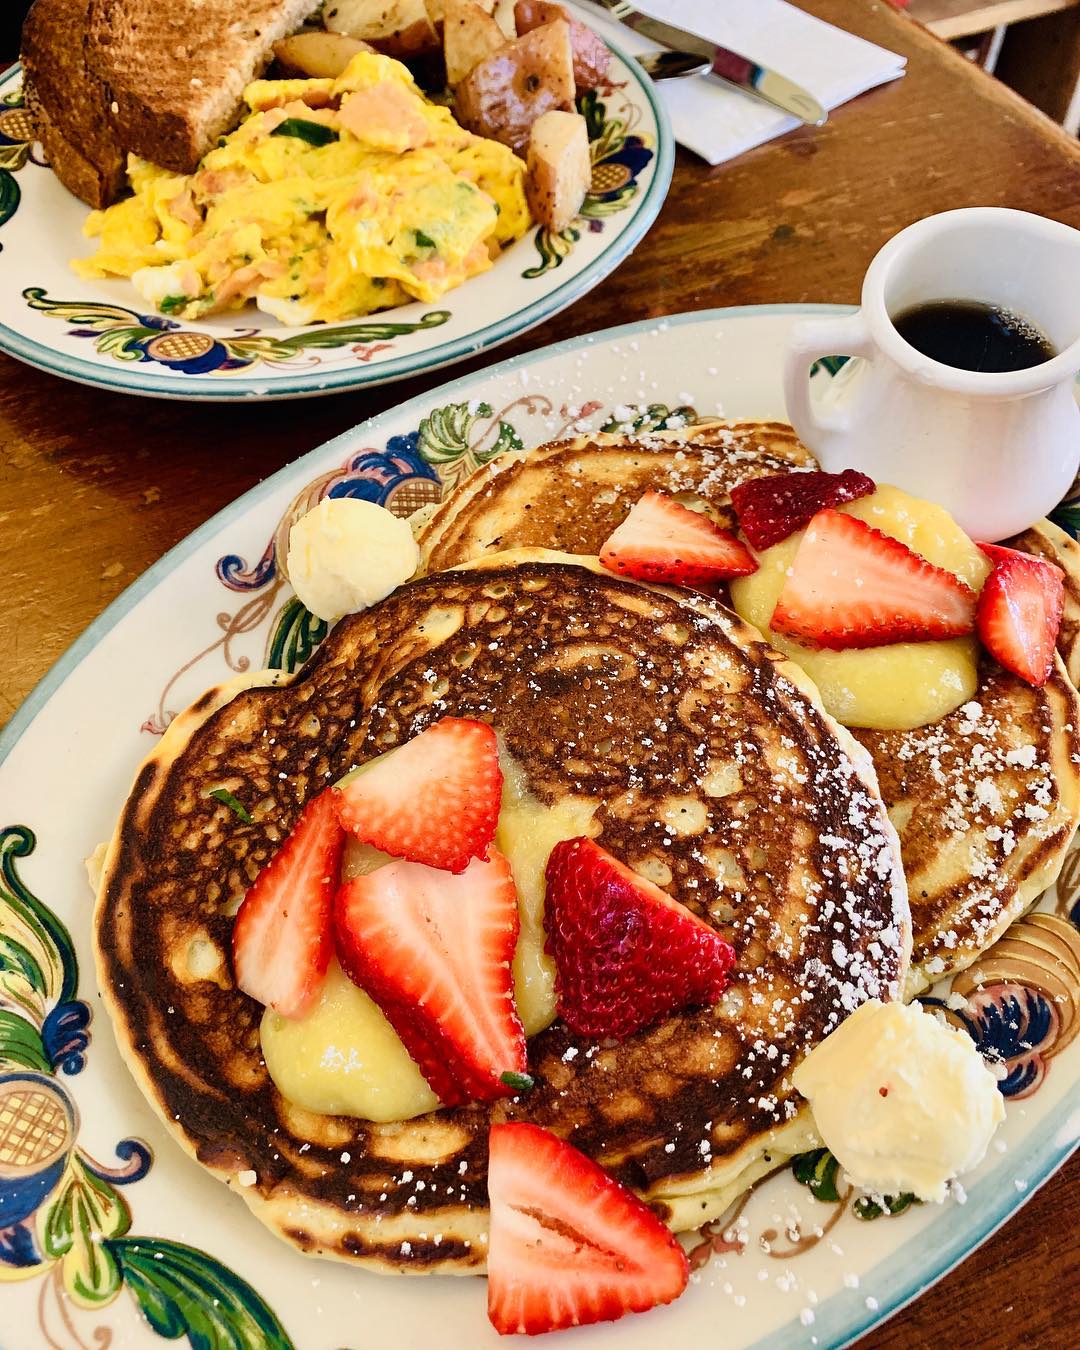 Plate of pancakes with strawberries from Zazie. Photo by Instagram user @eatinwithcorinna